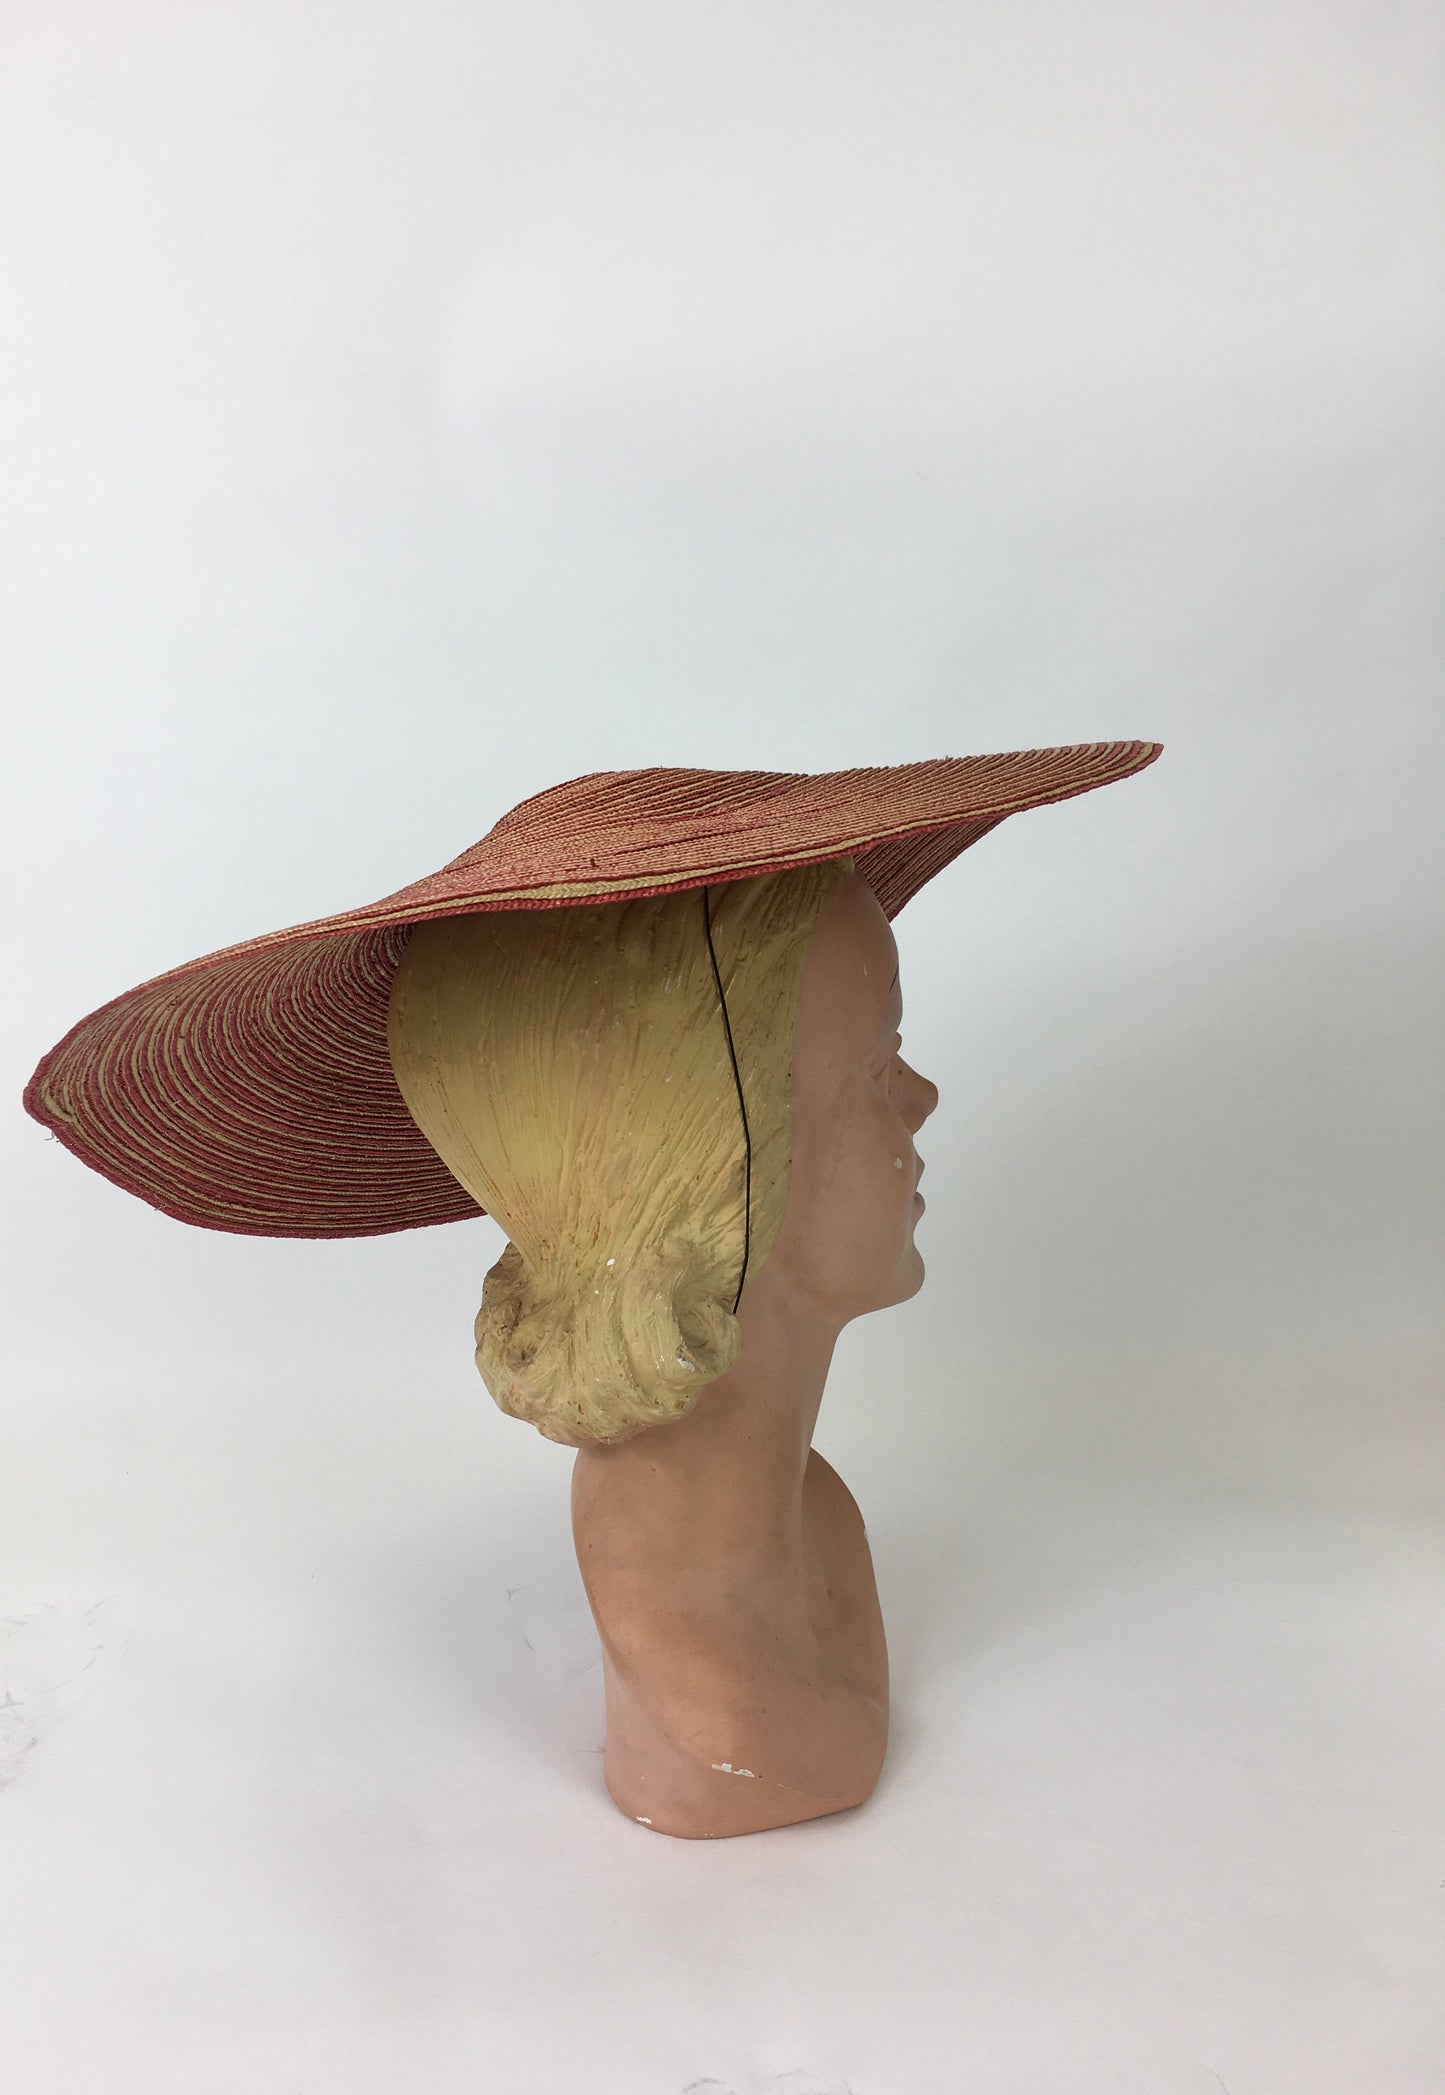 Original 1940’s Wide Straw Sun Hat - In A Beautiful Red & Natural Straw